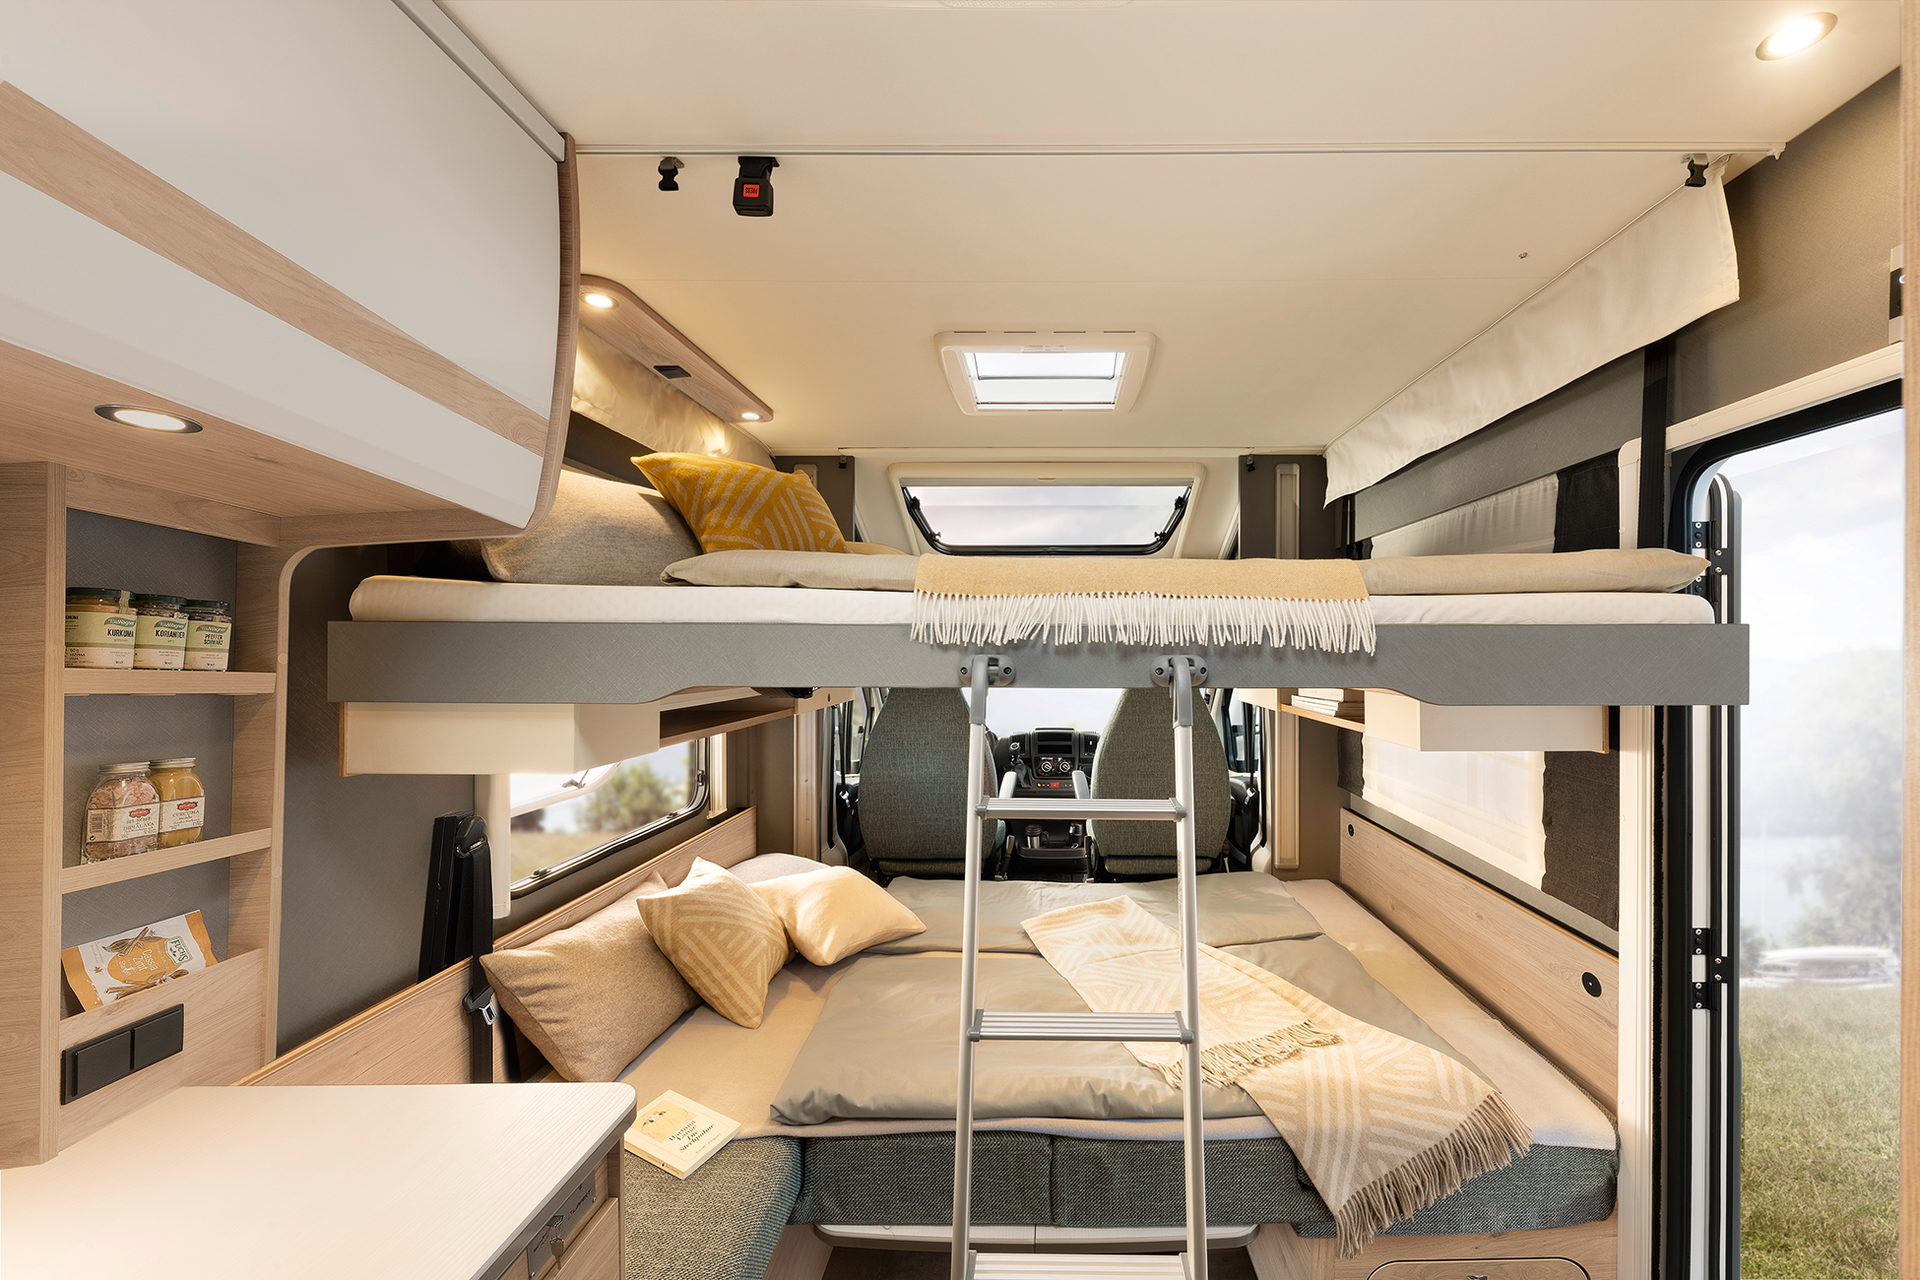 Four sleeping berths are also possible – move the pull-down bed bed to the middle position and convert the seating lounge into an extra bed. • T 6762